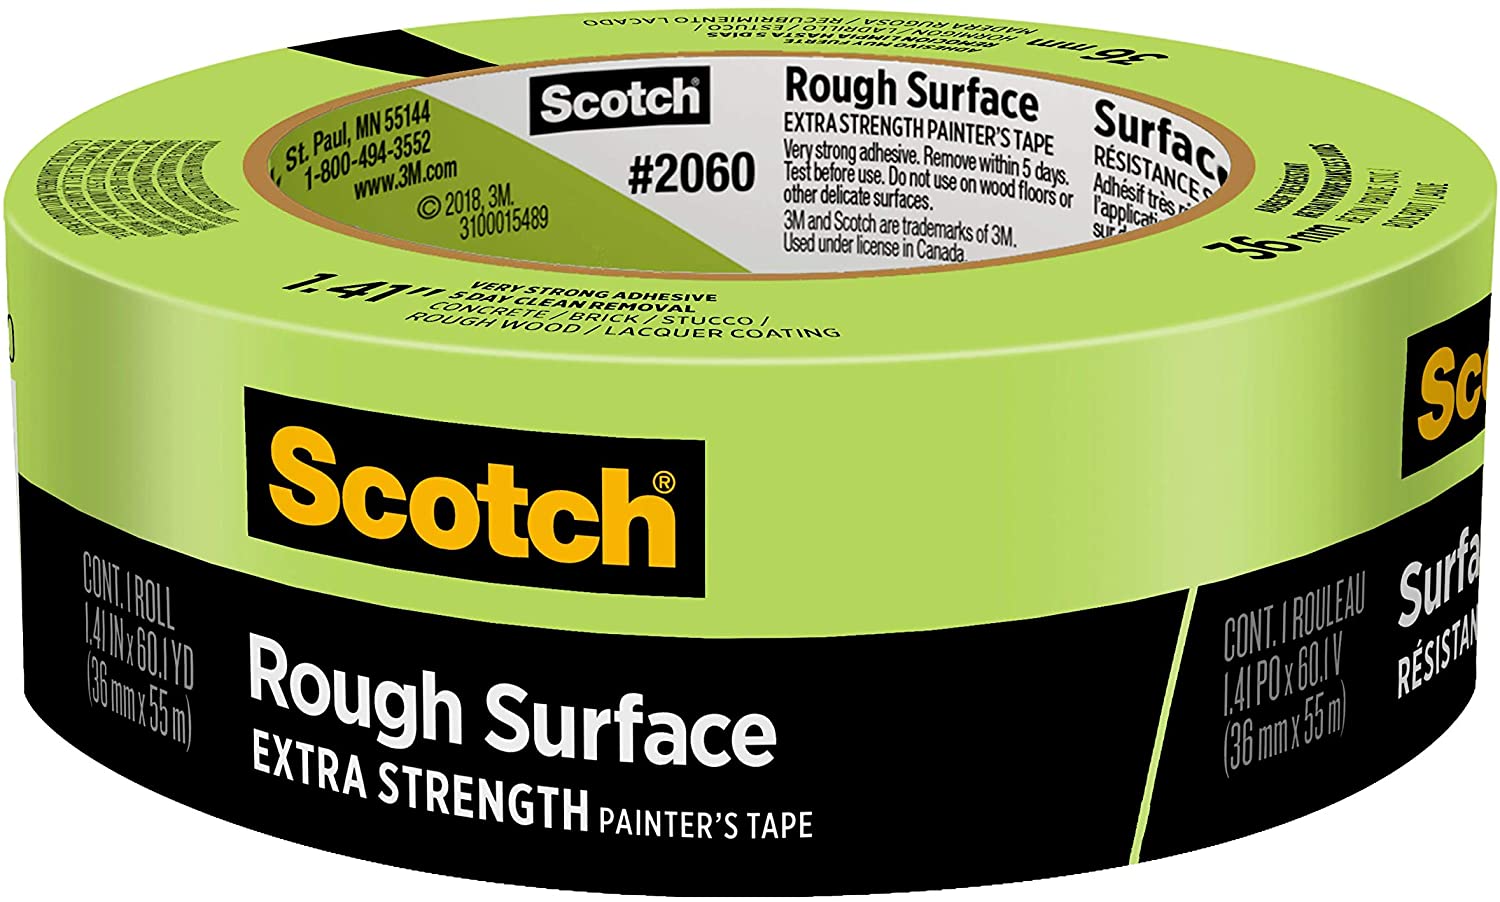 Scotch Rough Surface Painter’s Tape $4.97 Free Shipping